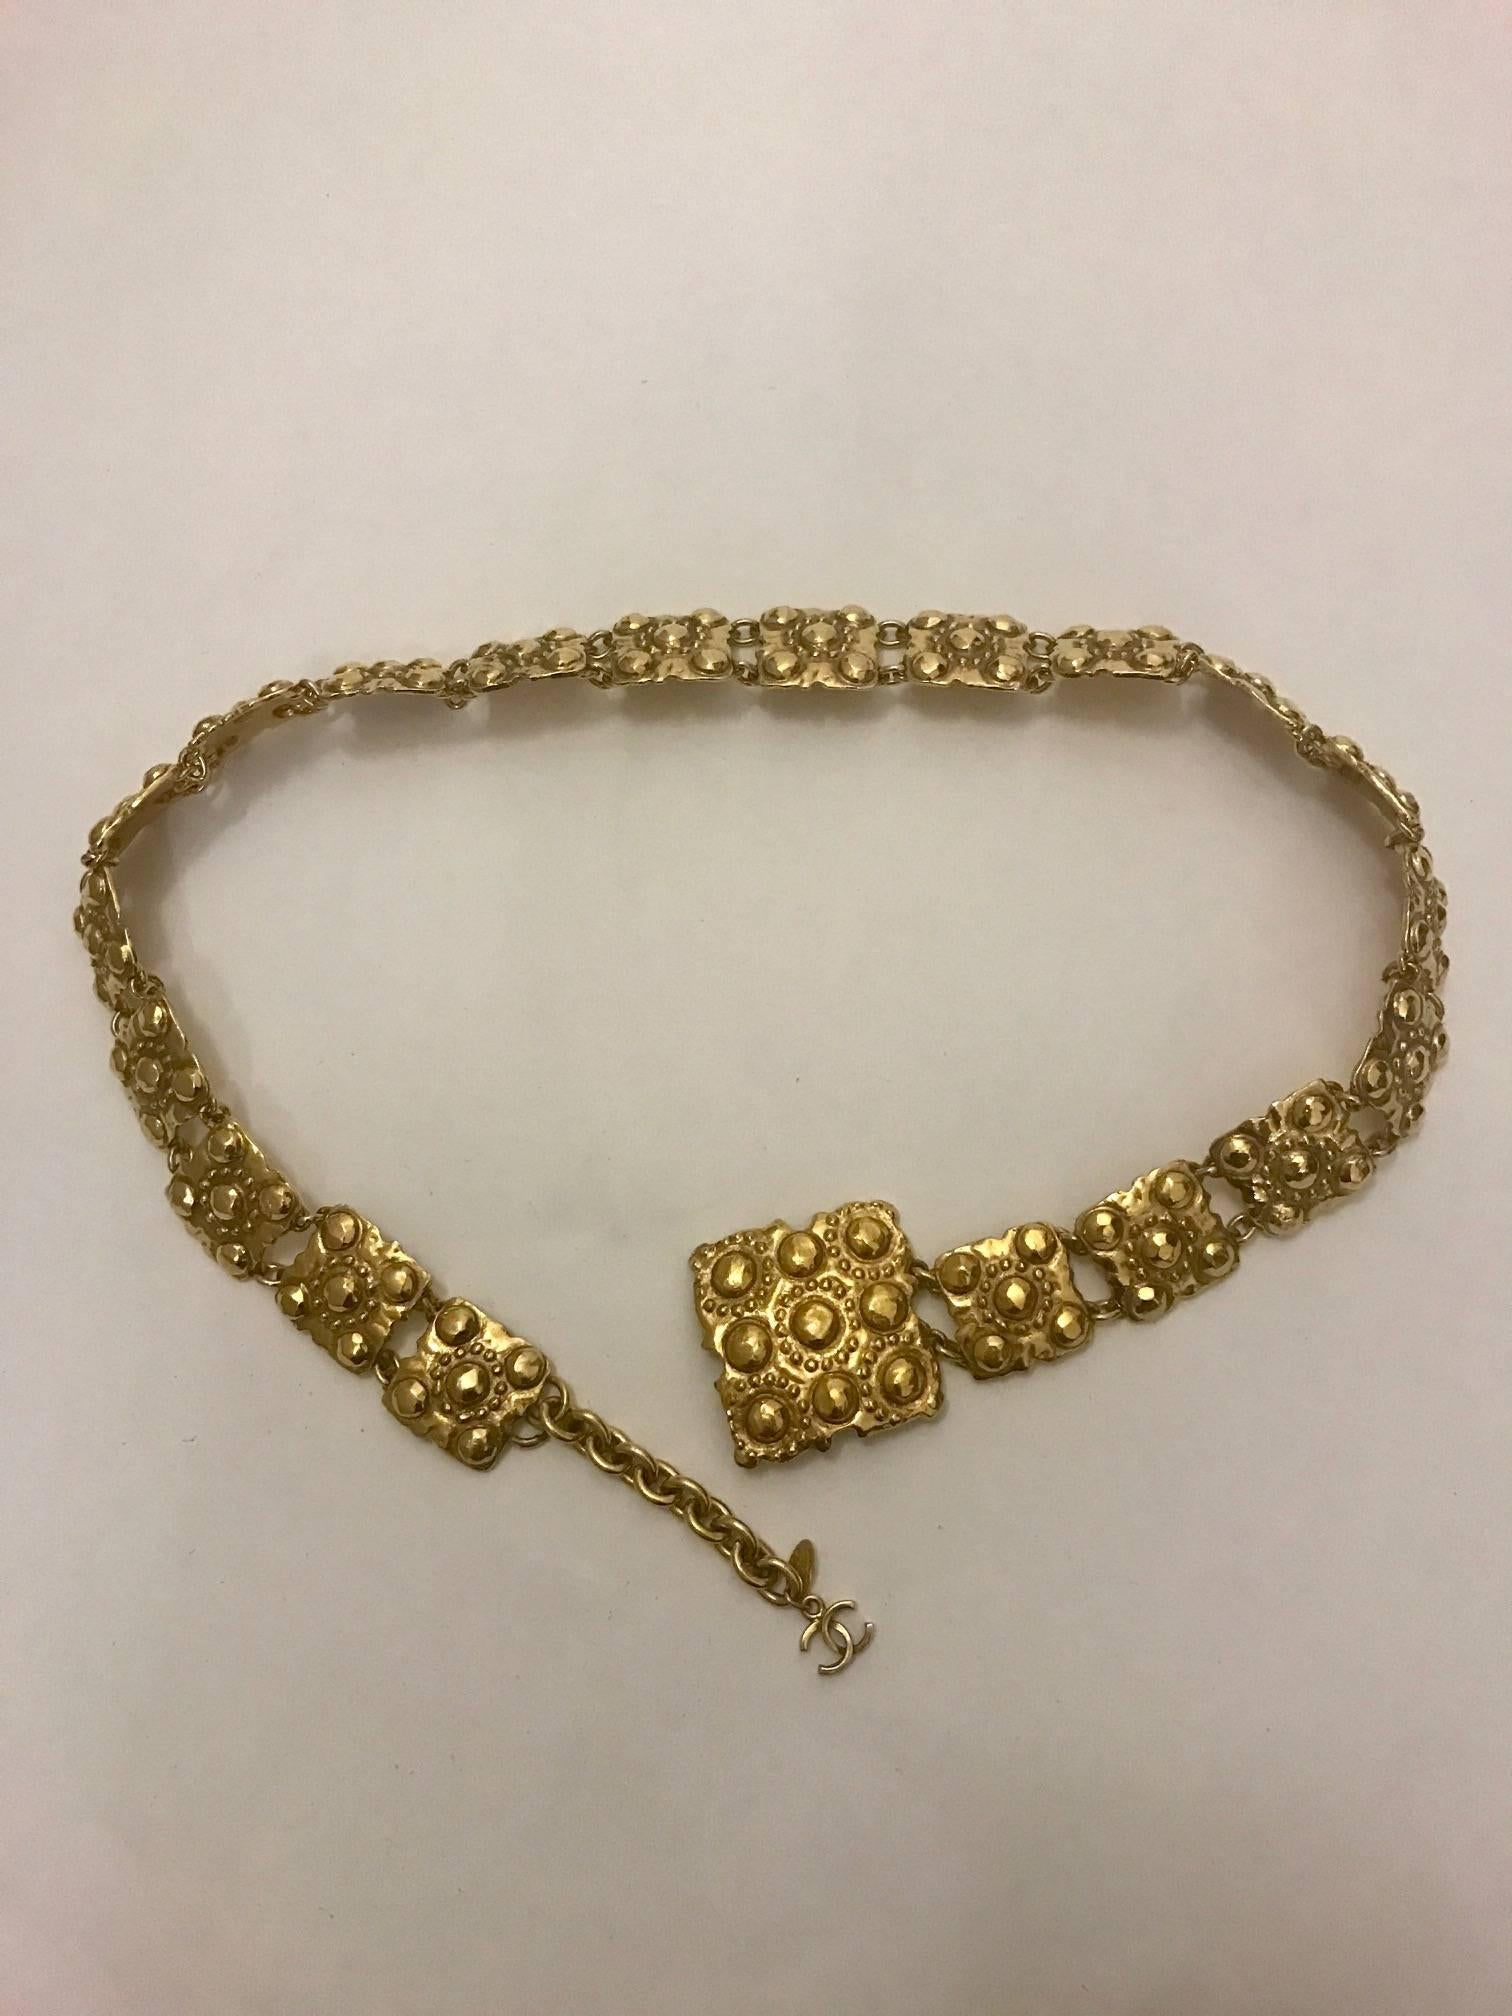 Chanel vintage gold tone belt from collection 23 (1986, first year of jewelry designer Victoire de Castellane.) Gold chain links connect square medallions with raised round detailing. Hanging CC logo at front.

Stamped 'Chanel, 2 CC 3, Made in